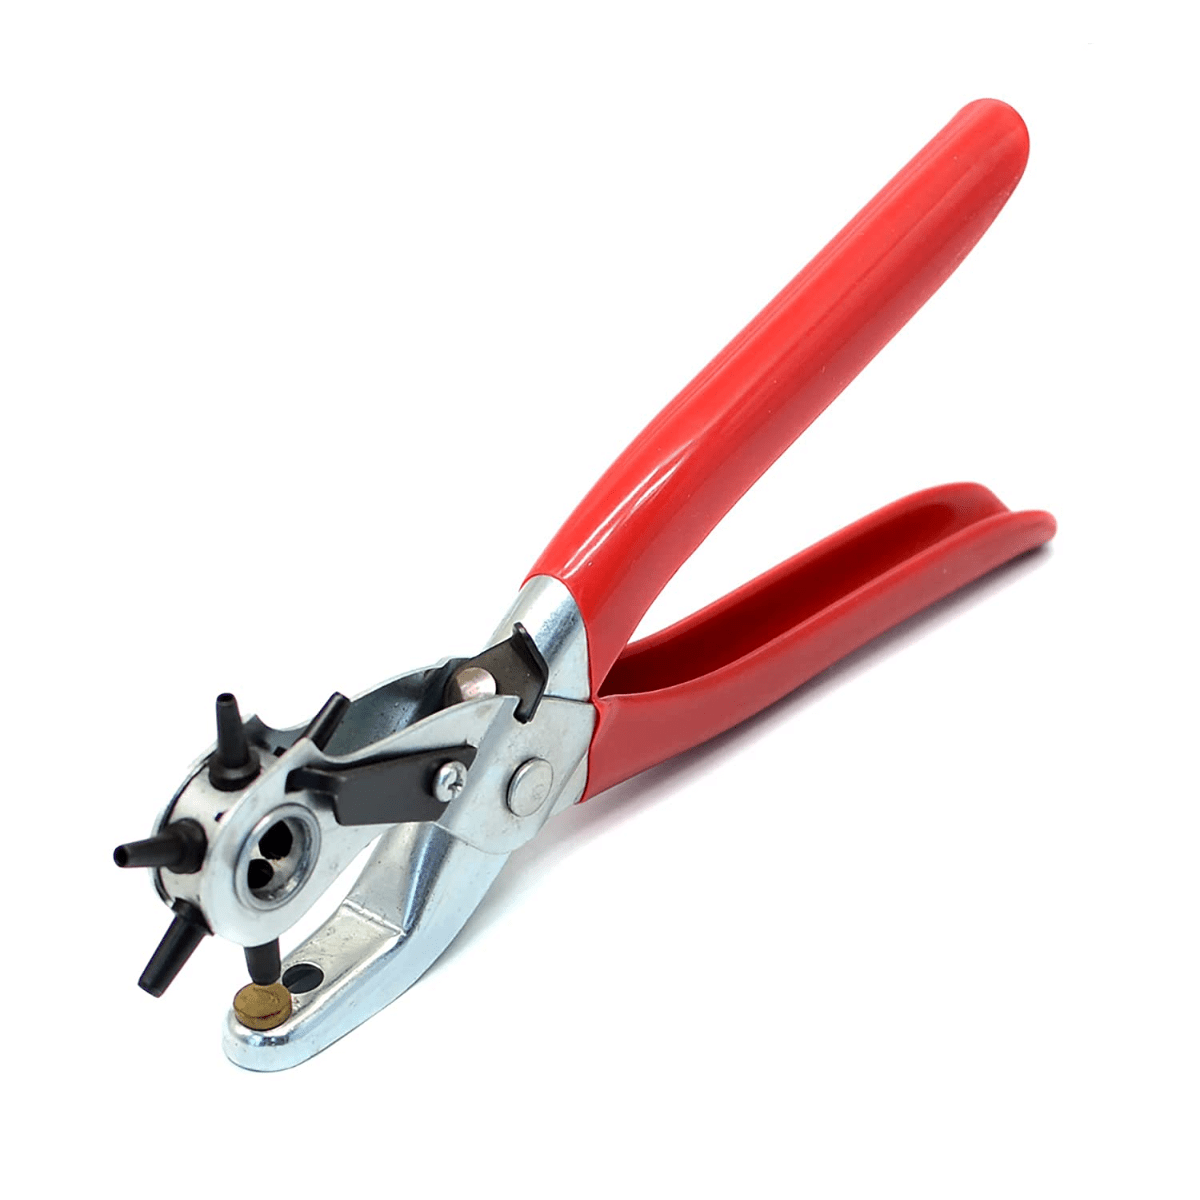 8 Heavy Duty Stainless Steel Leather Hole Punch Pliers With 6 Hole Sizes -  Hill Leather Company